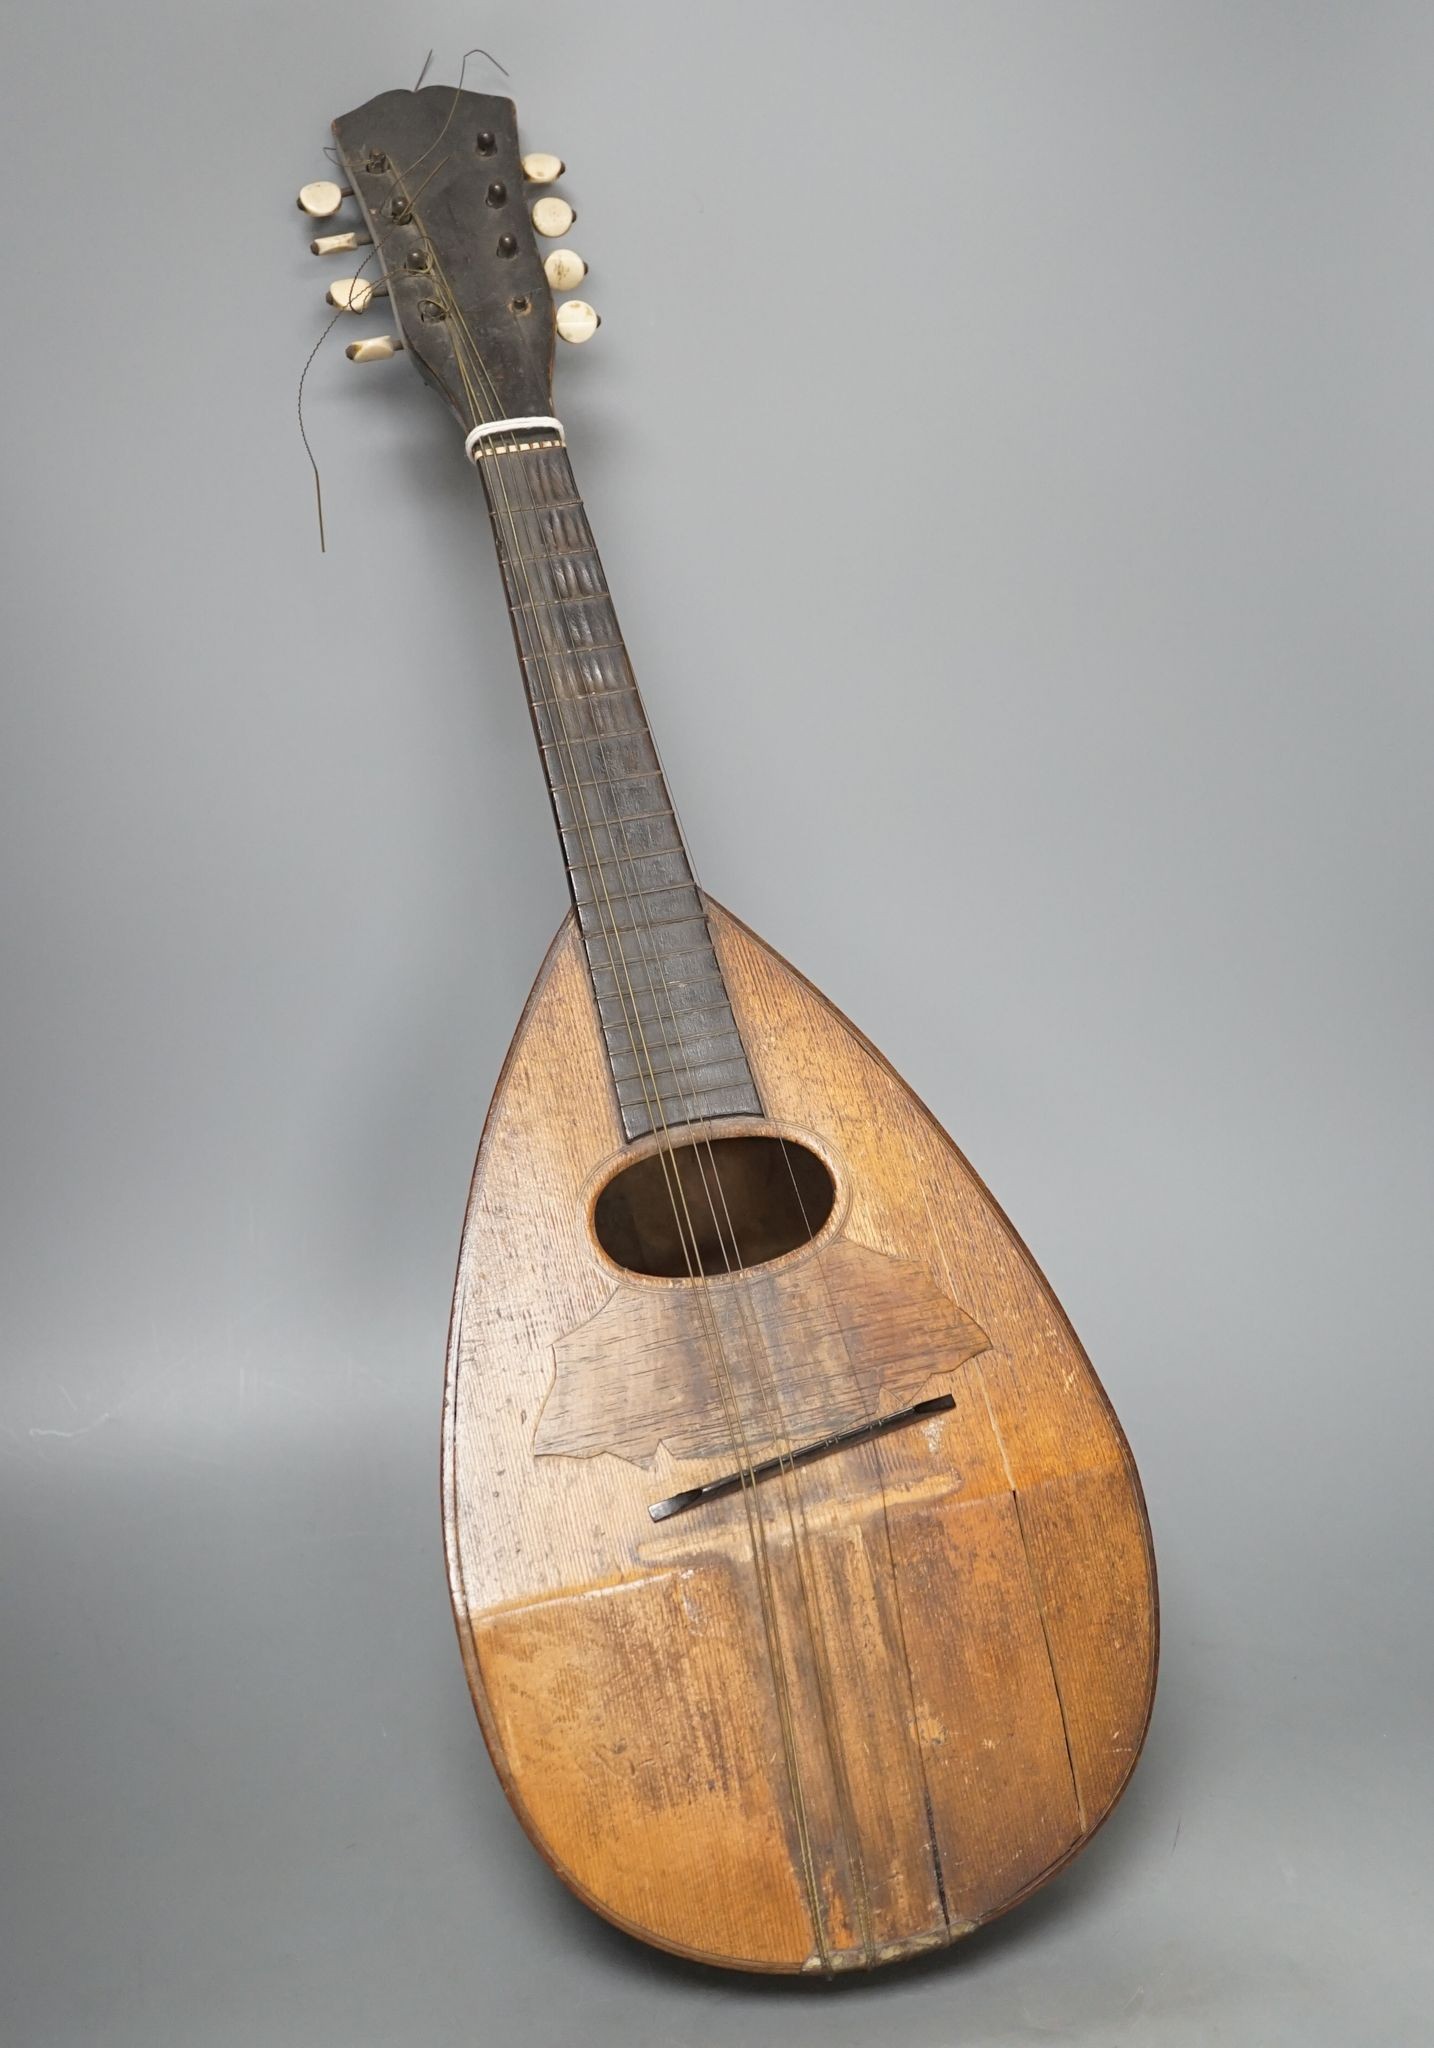 A rosewood and boxwood mandolin with bone pegs, circa 1900